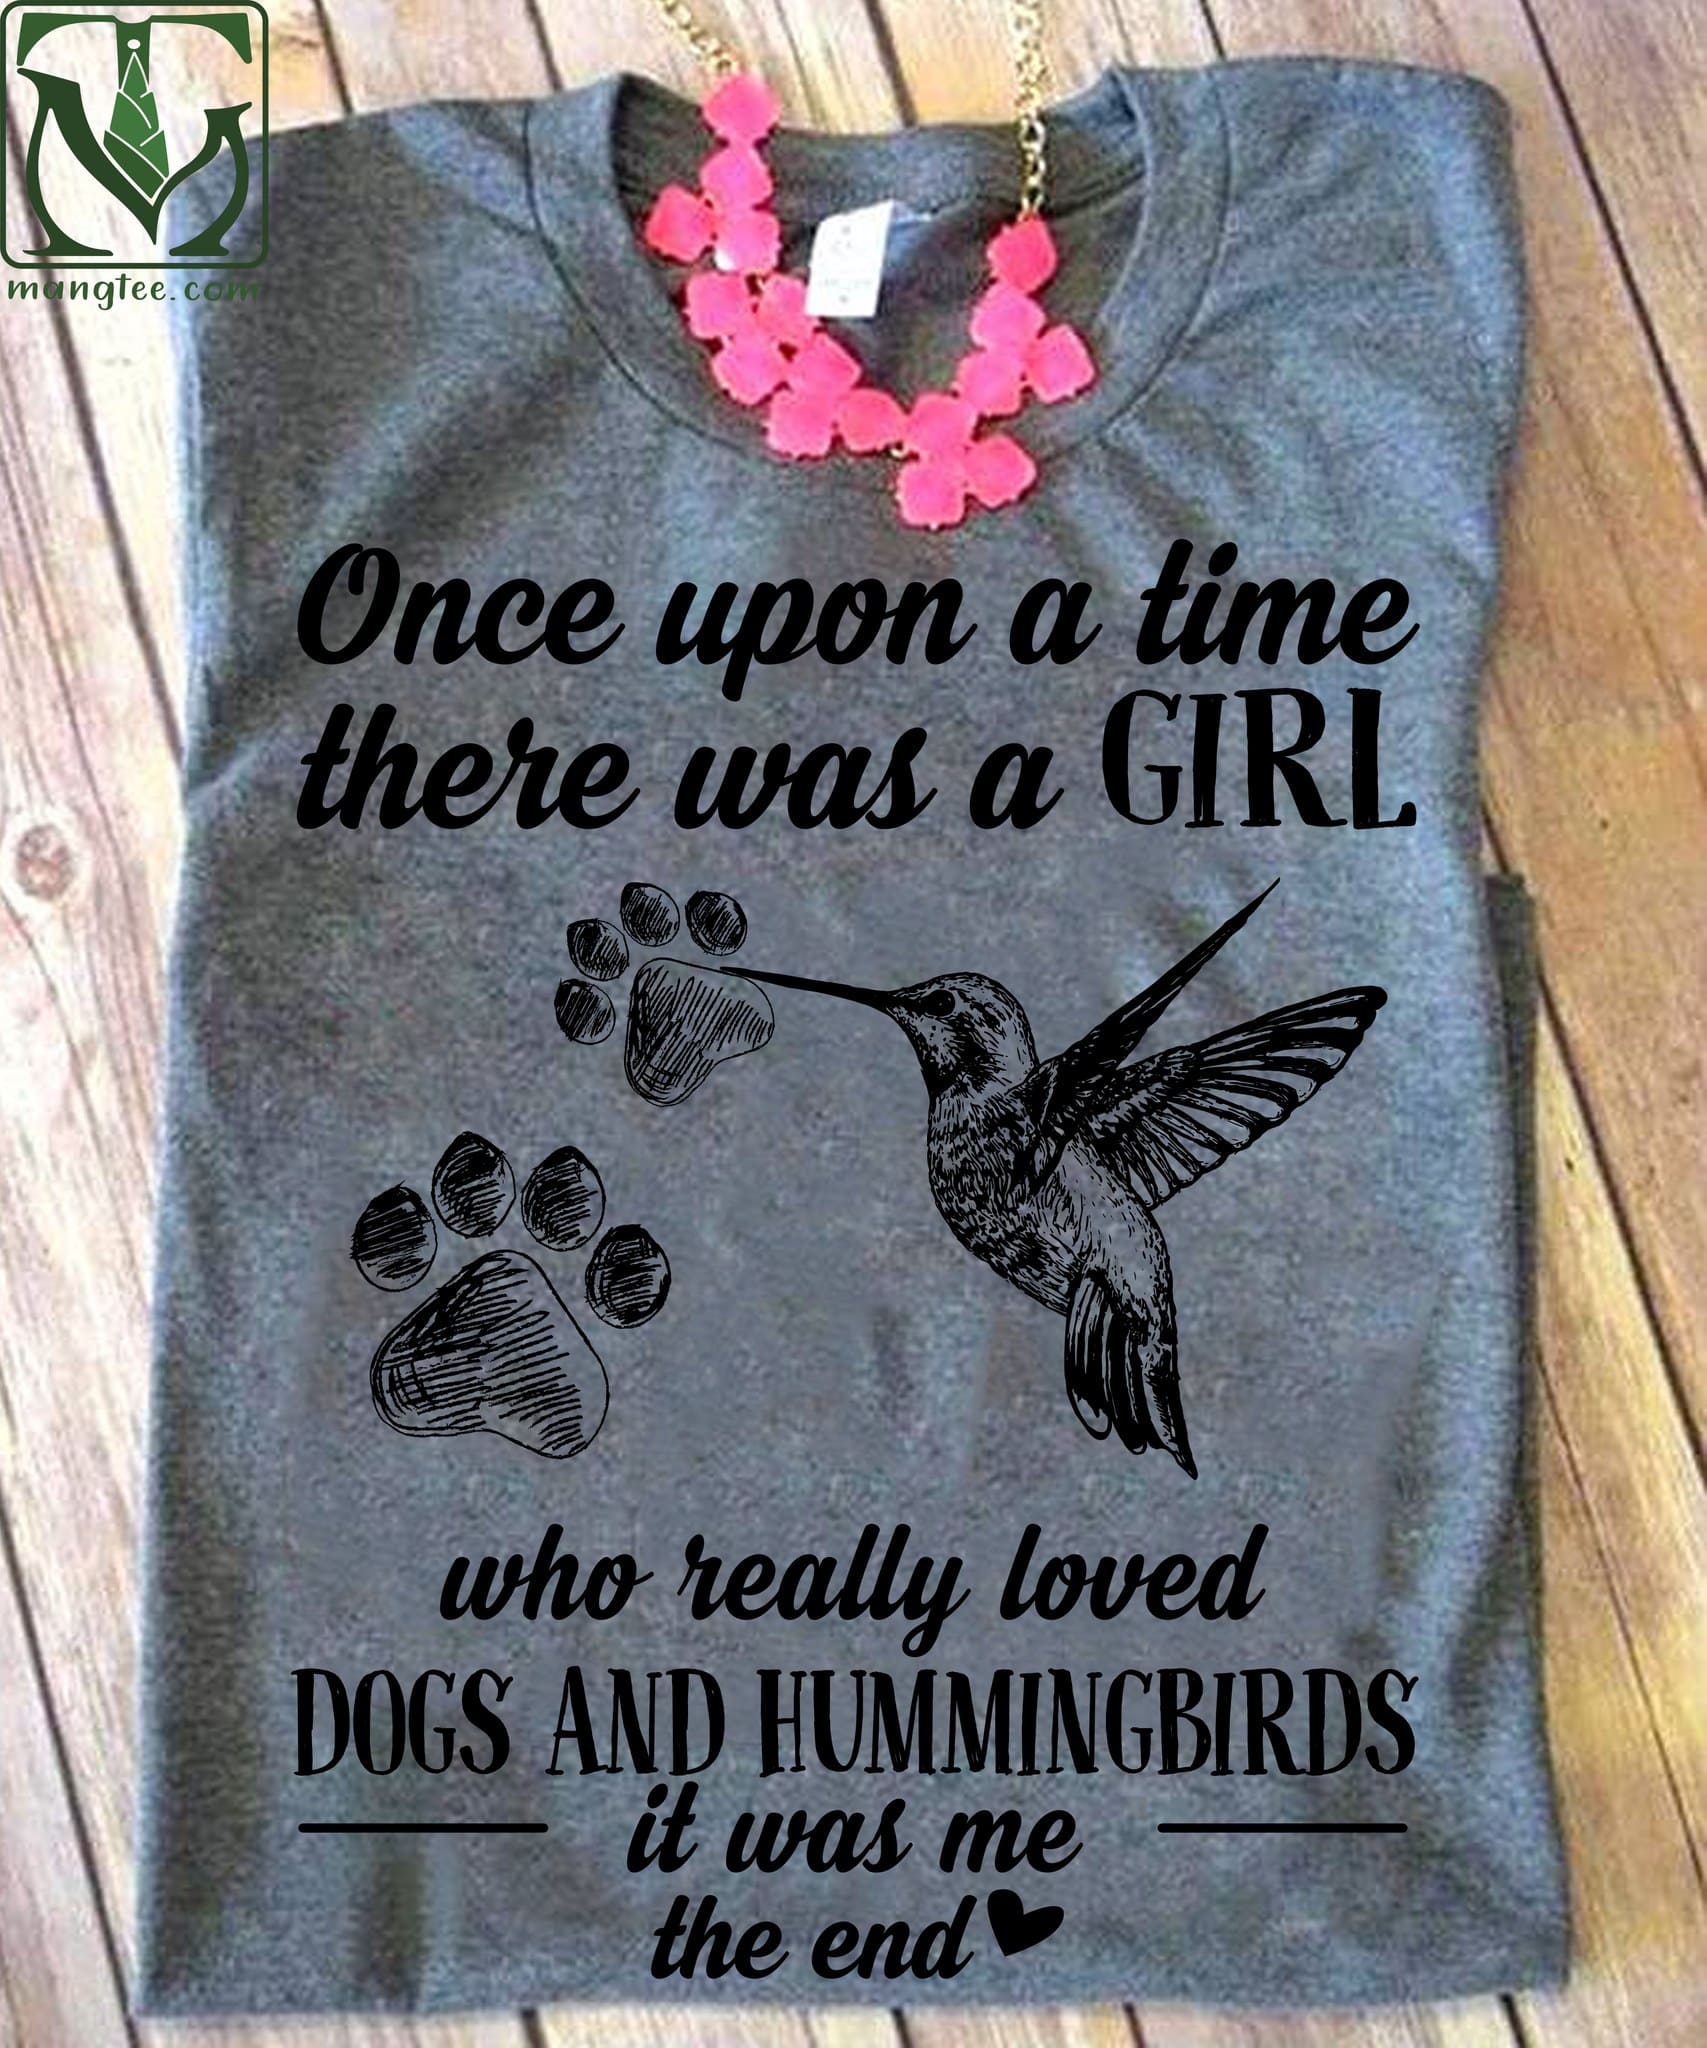 Once upon a time there was a girl who really loved dogs and hummingbirds - Animal lover T-shirt, hummingbird and dog footprint